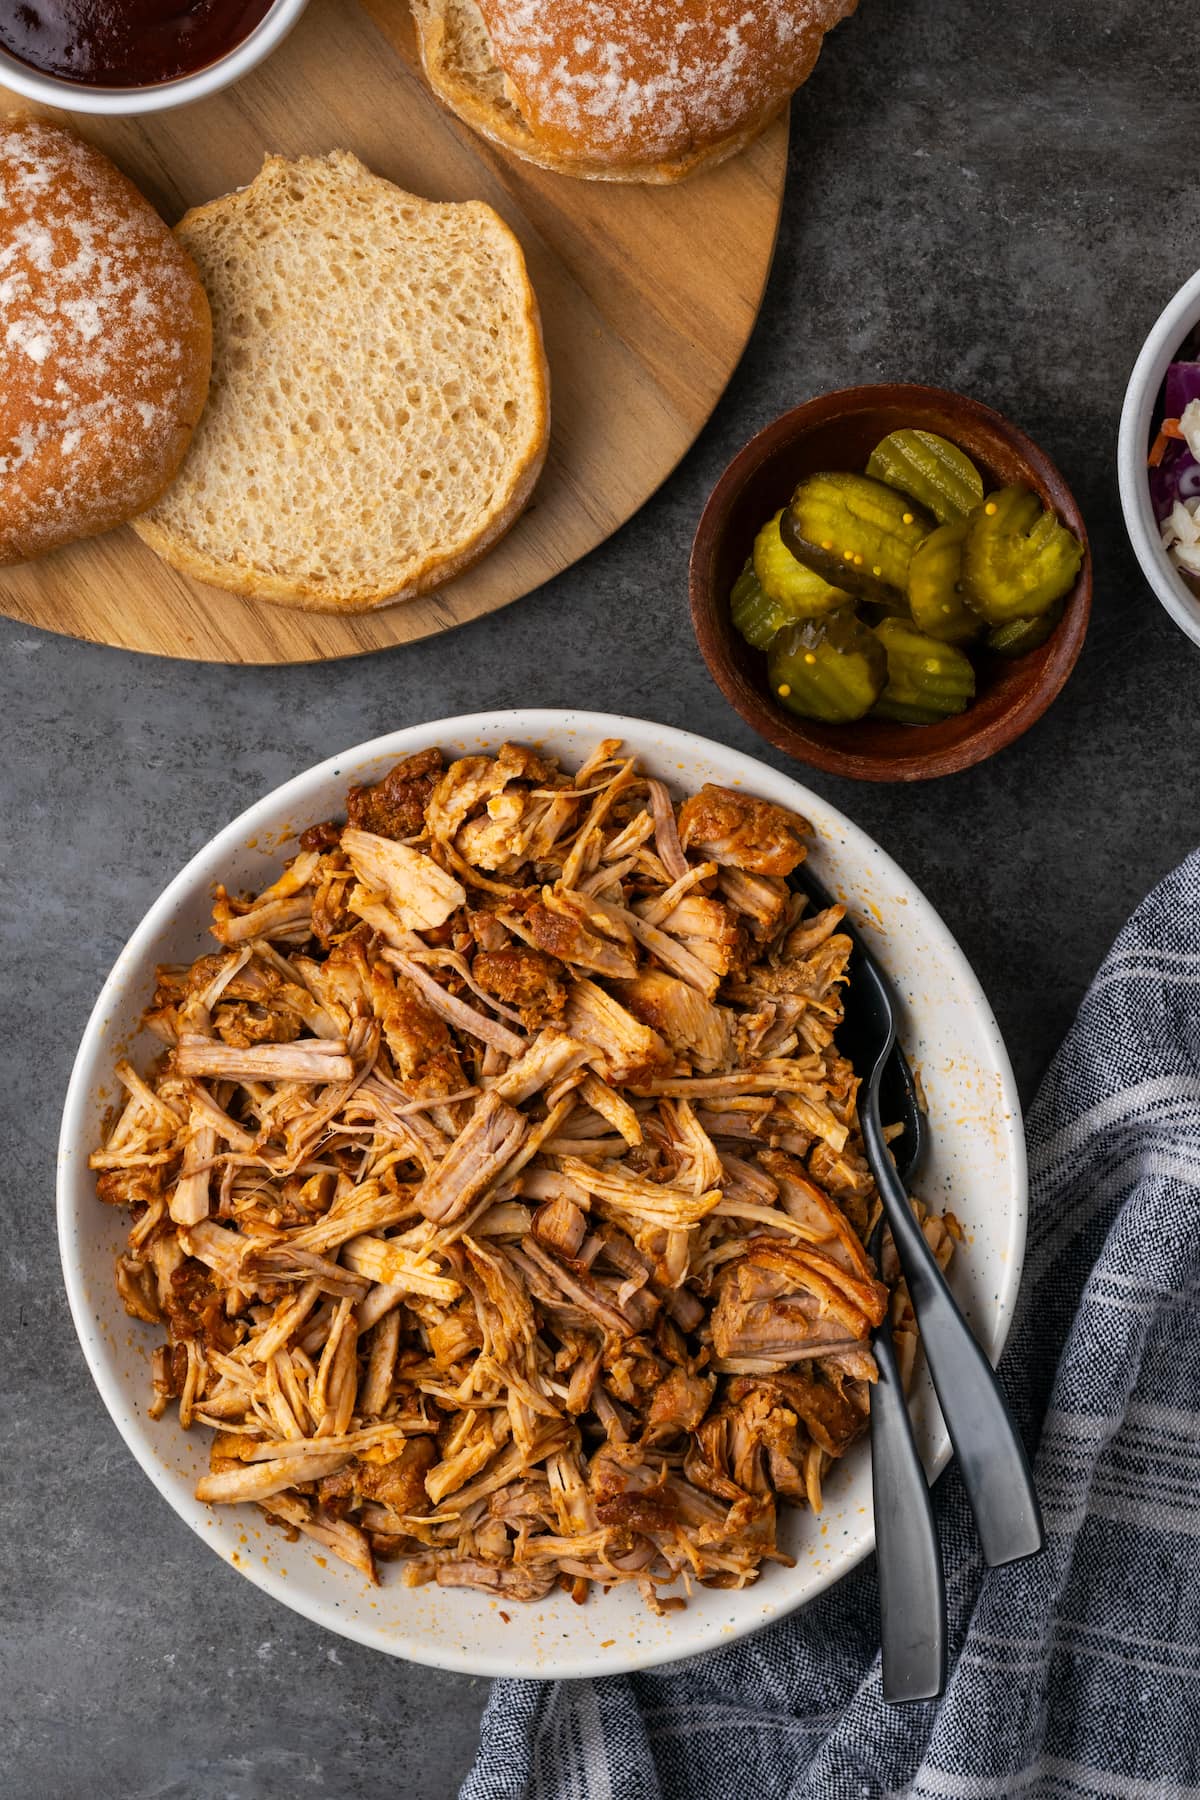 Overhead view of a bowl of Instant Pot pulled pork next to buns cut in half on a wooden cutting board, and a small bowl of pickles.